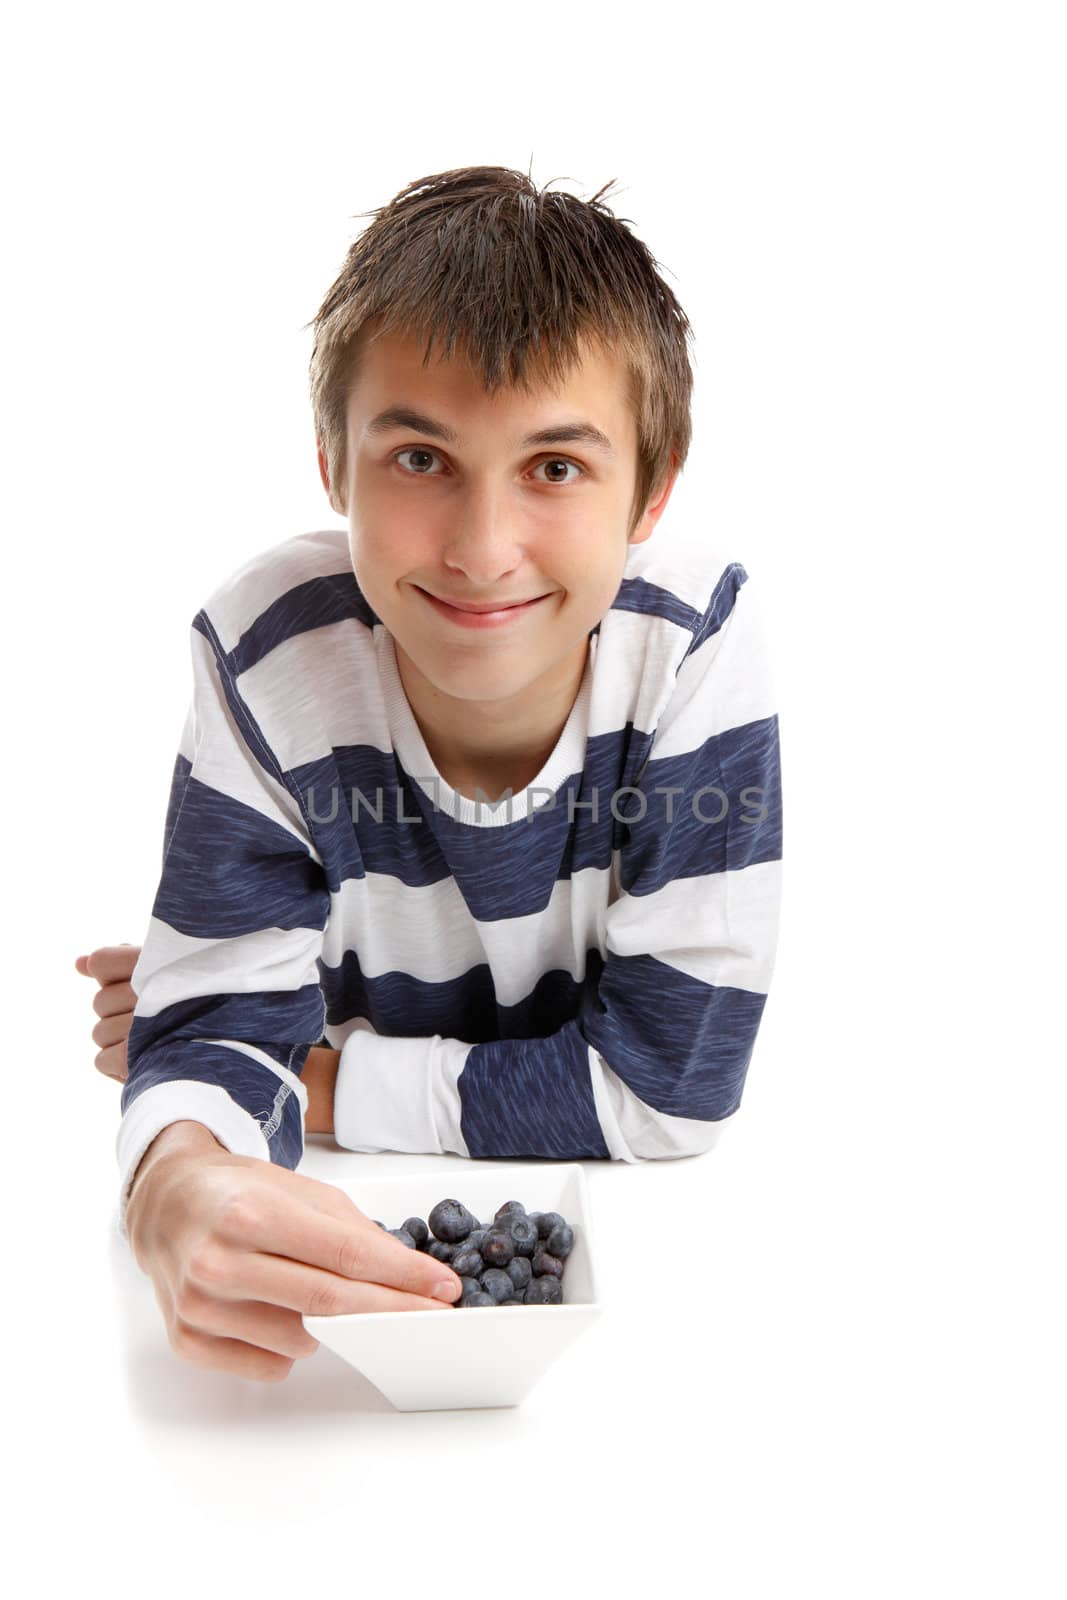 A young boy wearing a striped shirt is relaxing, eating from a bowl of fresh healthy blueberries.  White background, space for copy.